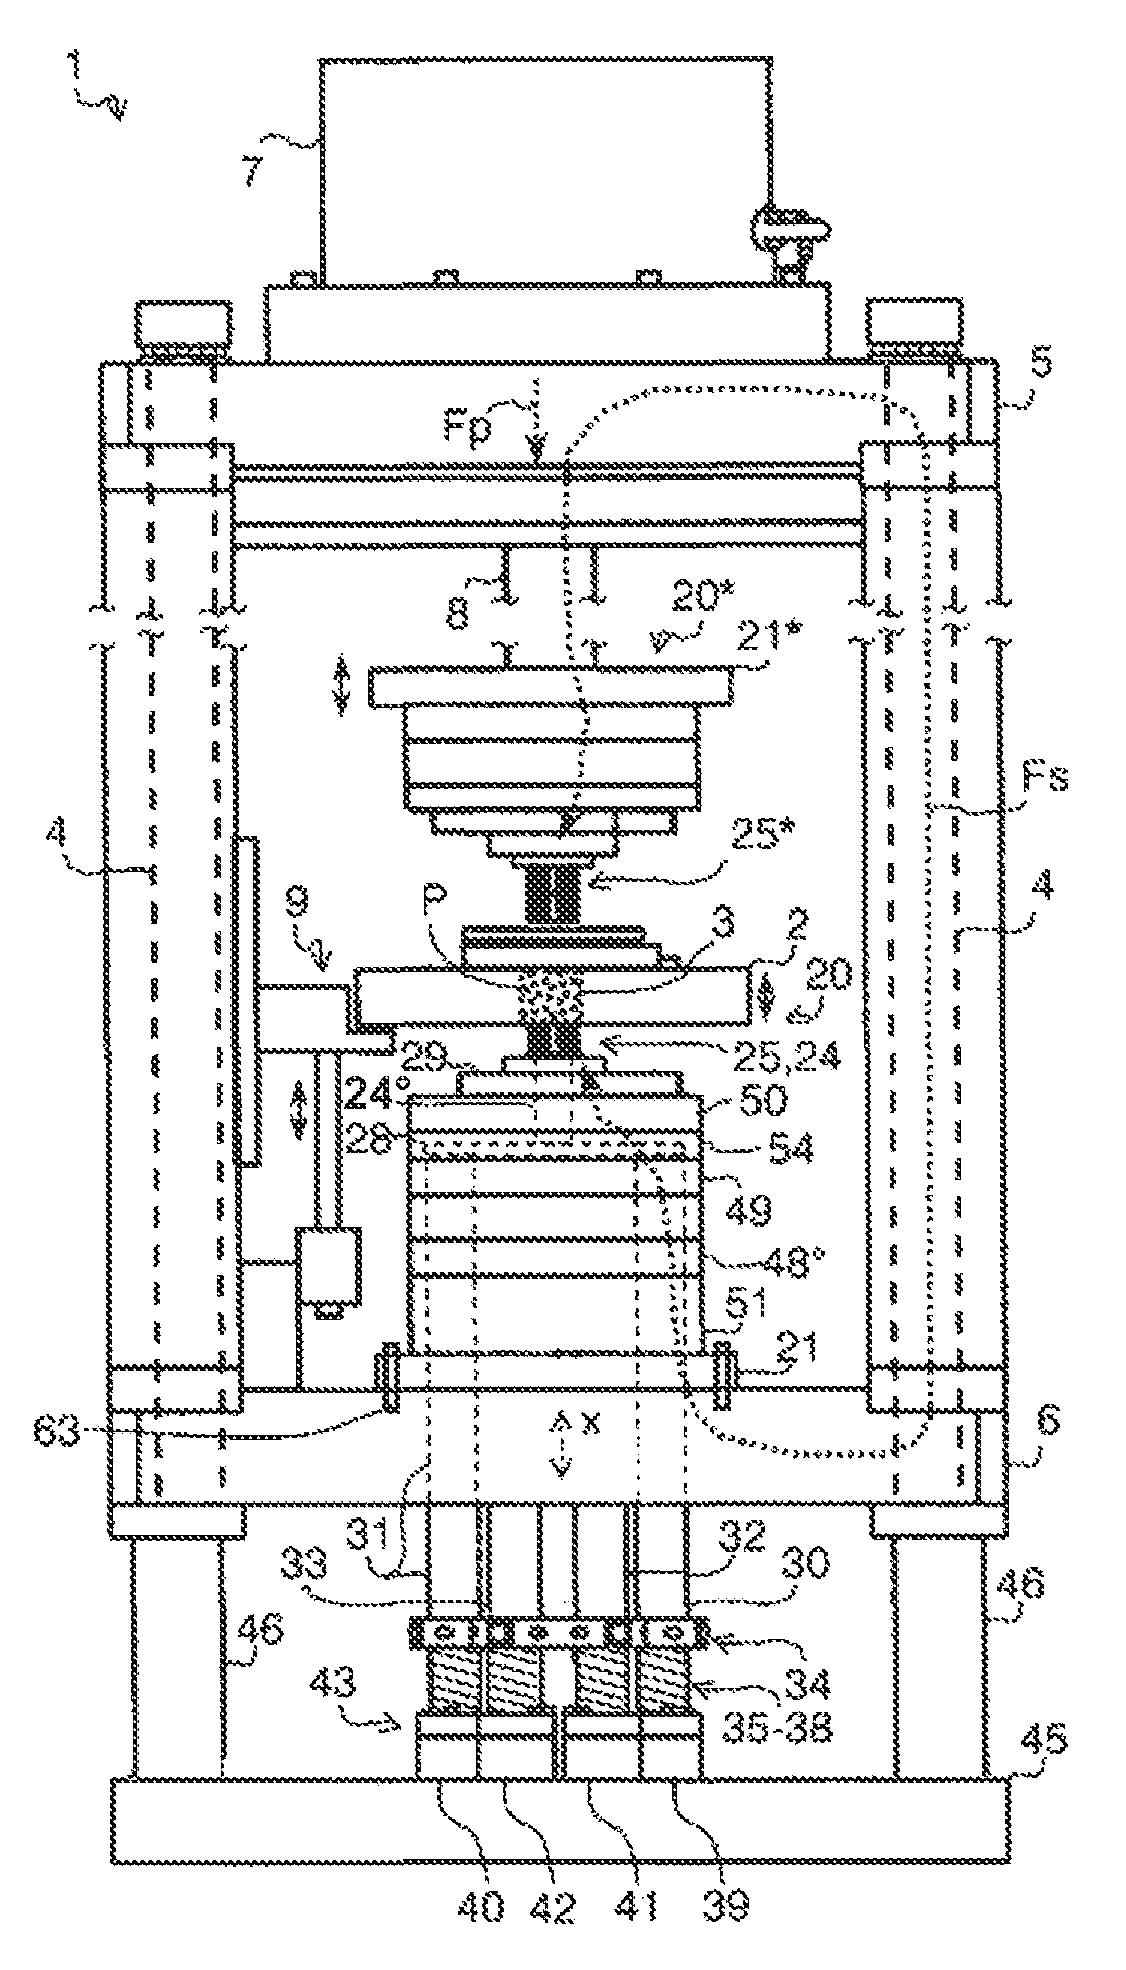 Ceramic-powder and/or metal-powder press tool, ceramic-powder and/or metal-powder press, modular system with such a press tool, method for assembling and operating a ceramic-powder and/or metal-powder press tool or a press